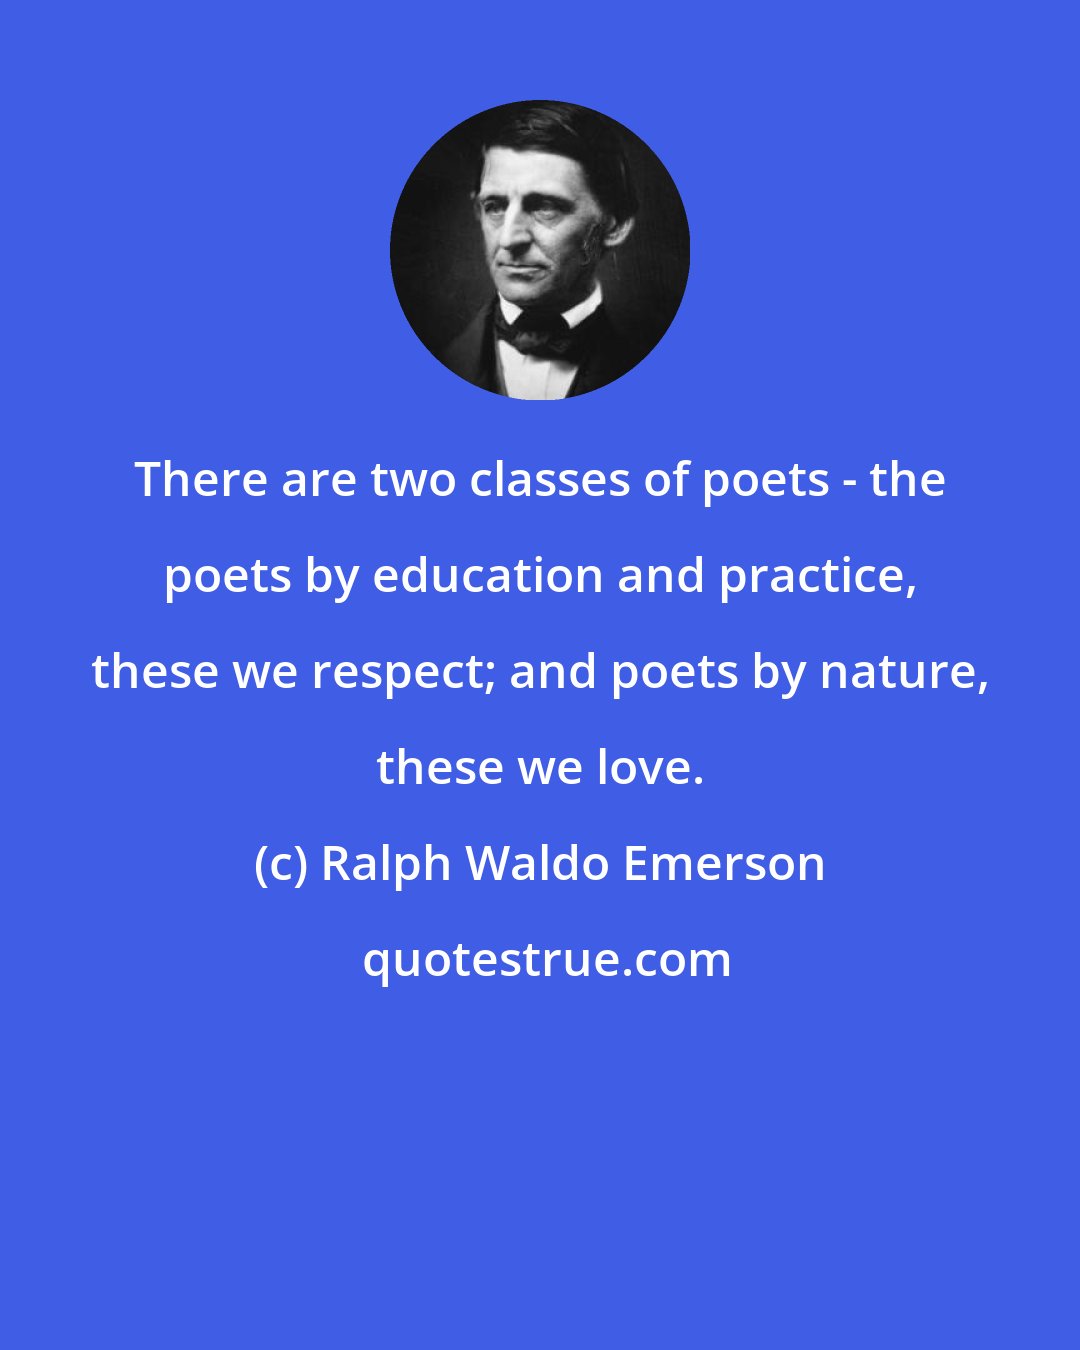 Ralph Waldo Emerson: There are two classes of poets - the poets by education and practice, these we respect; and poets by nature, these we love.